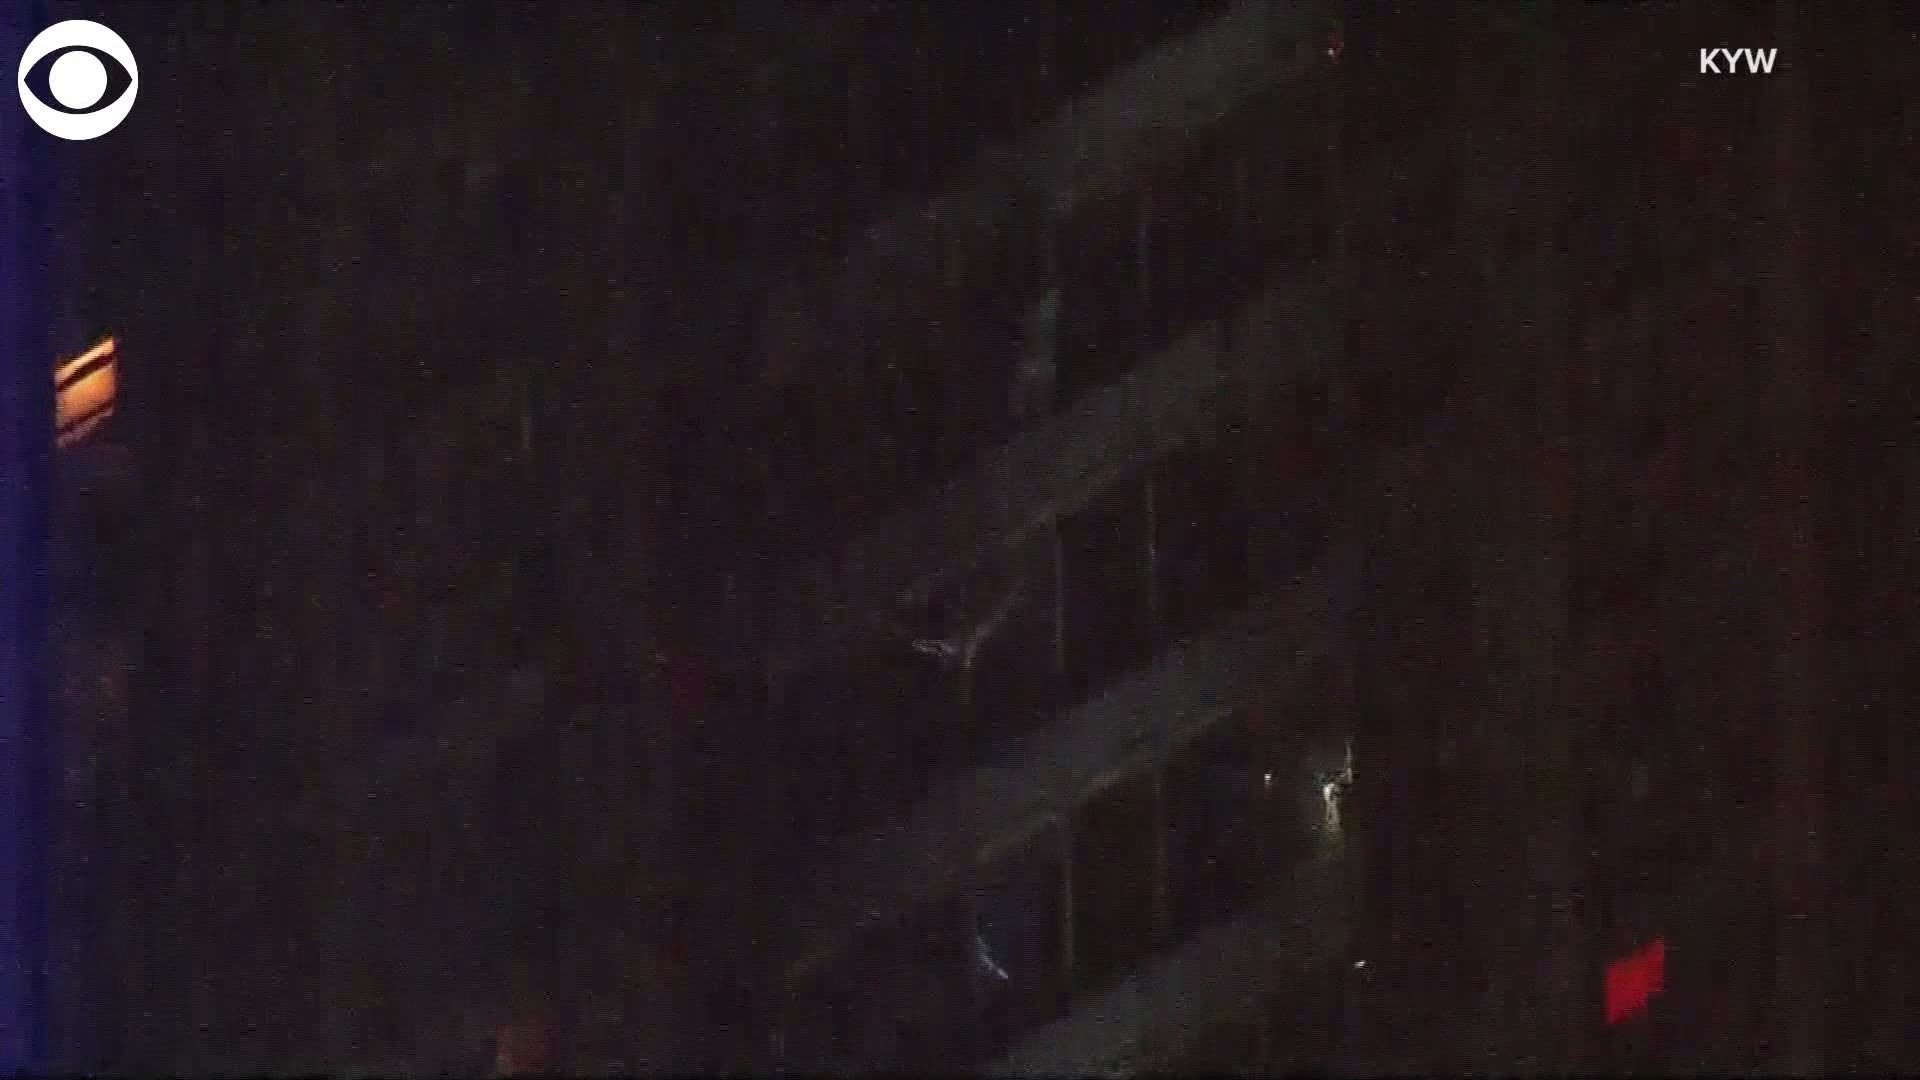 A man clung to the outside of a West Philadelphia high-rise and then climbed down at least 14 floors after a fire caused a building evacuation. Take a look at how the risky move helped him escape.